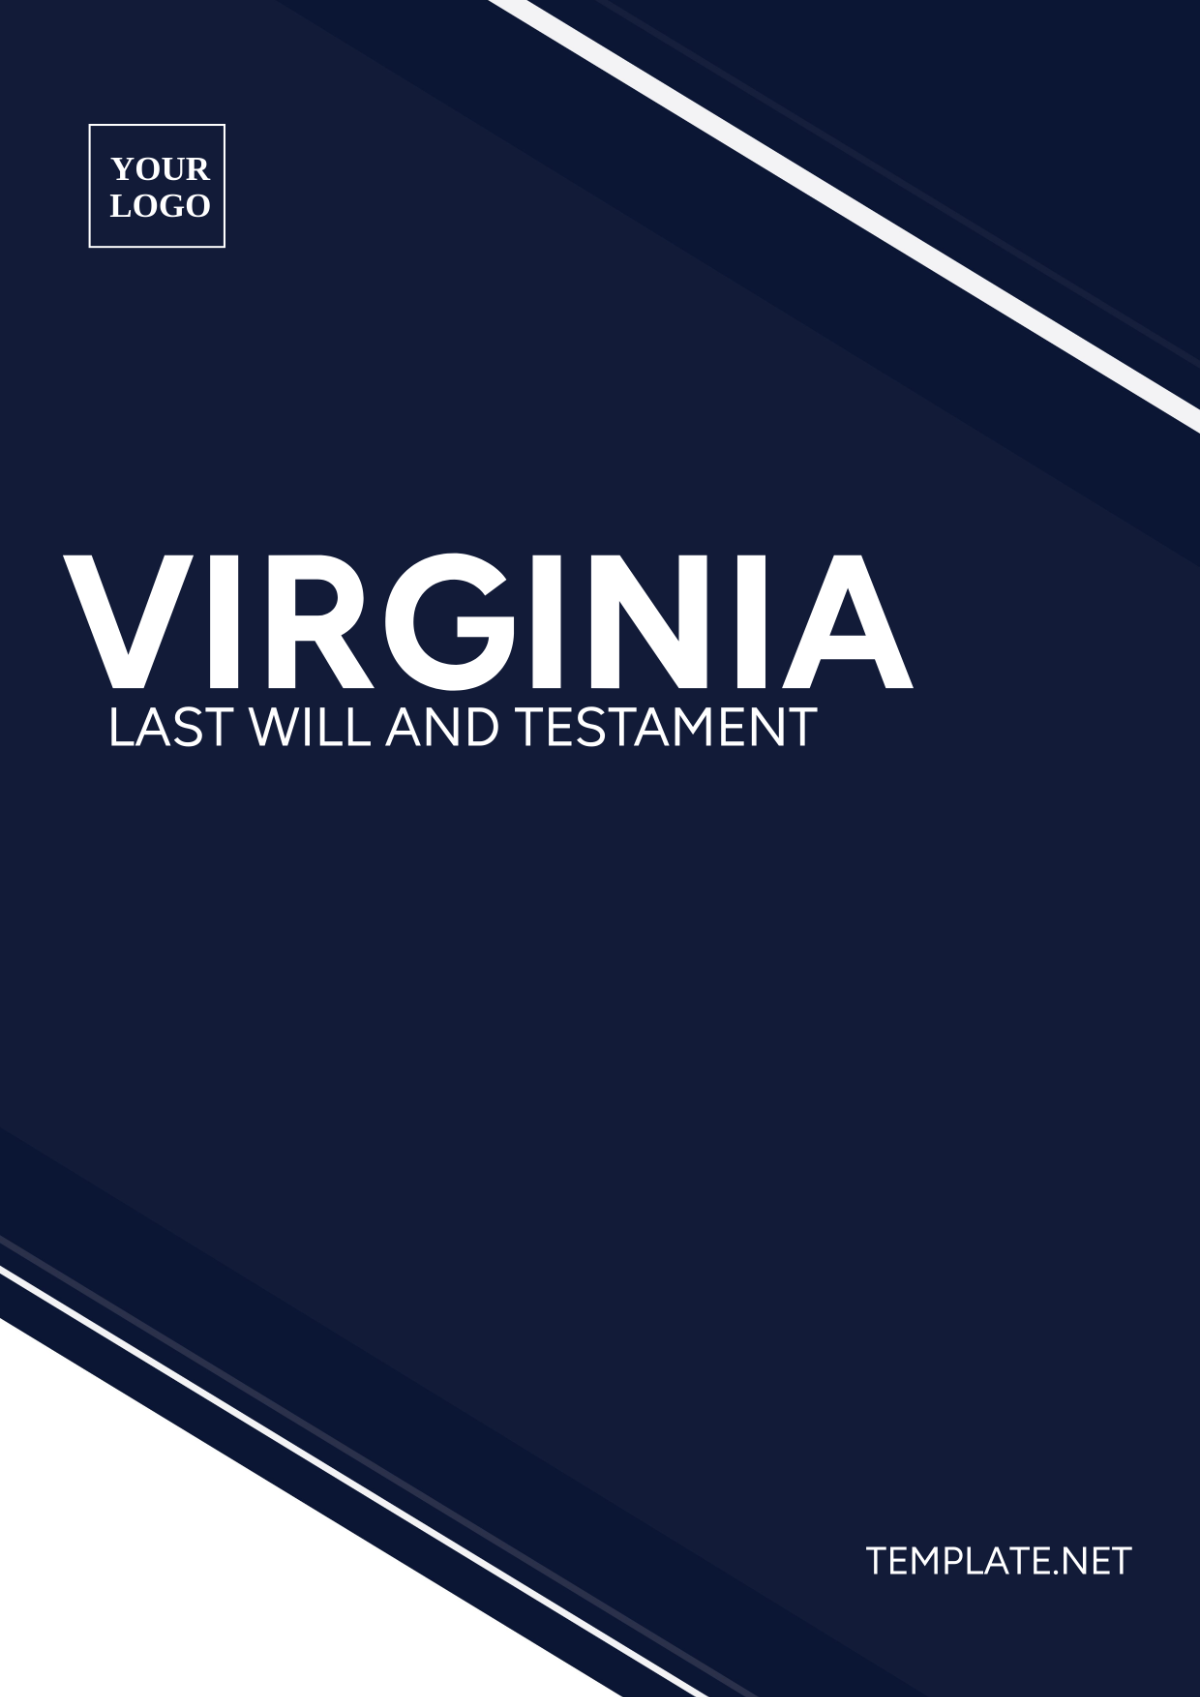 Virginia Last Will and Testament Template